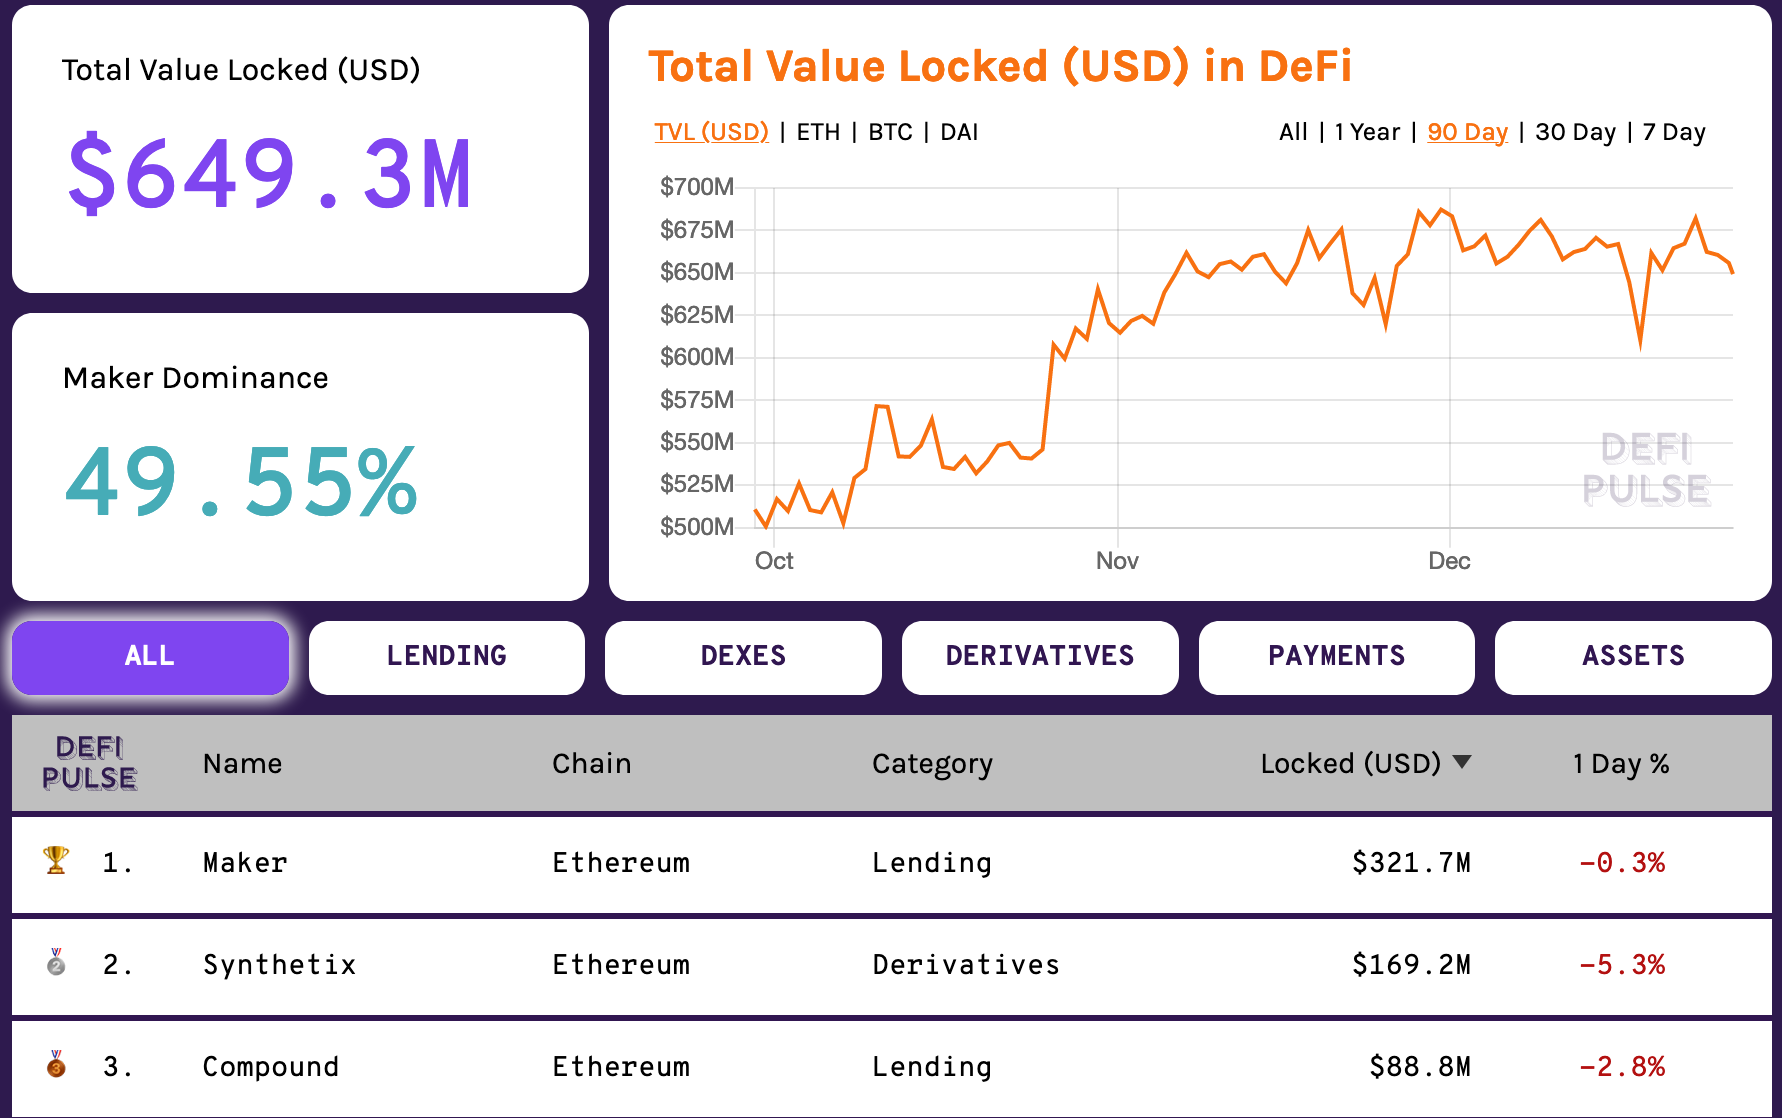 Makerdao Led To Growth In Value Locked In Defi Only To Face Steep - how to complete theorem reach surveys perfectly earn robux and